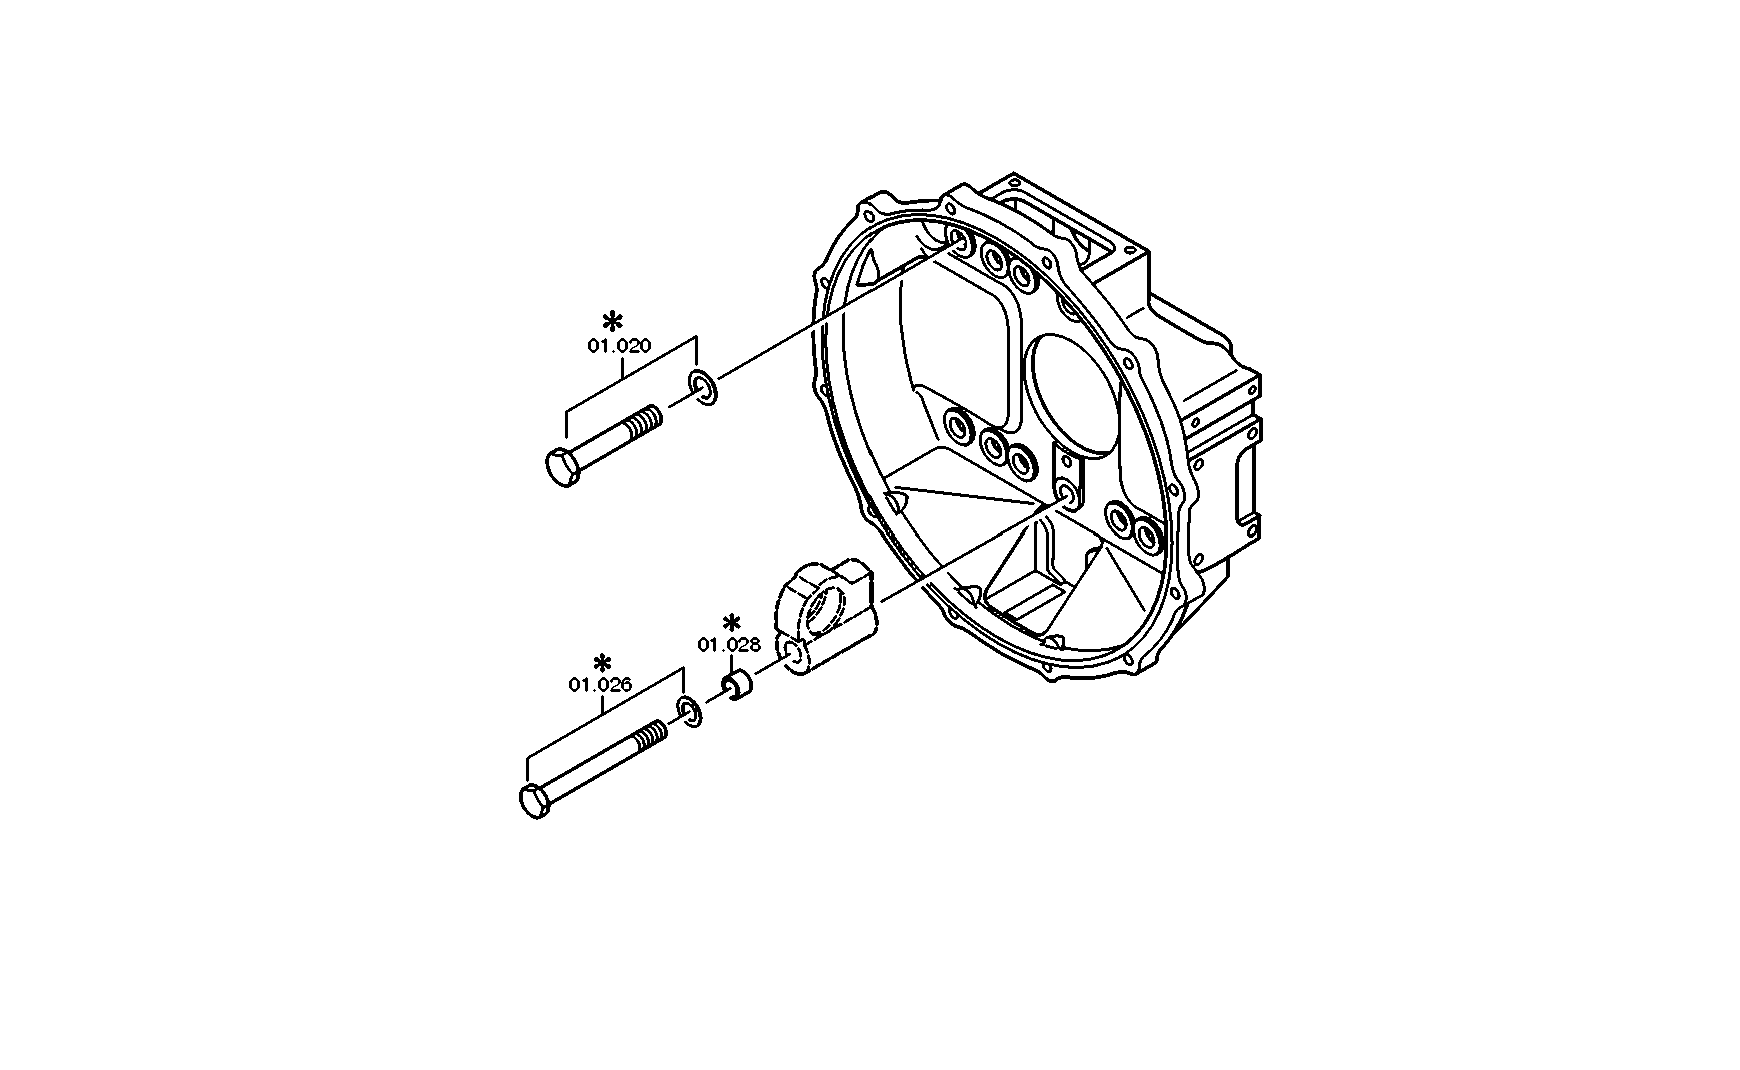 drawing for CARROCERIAS AYATS 0501006795 - CLUTCH CYLINDER (figure 3)